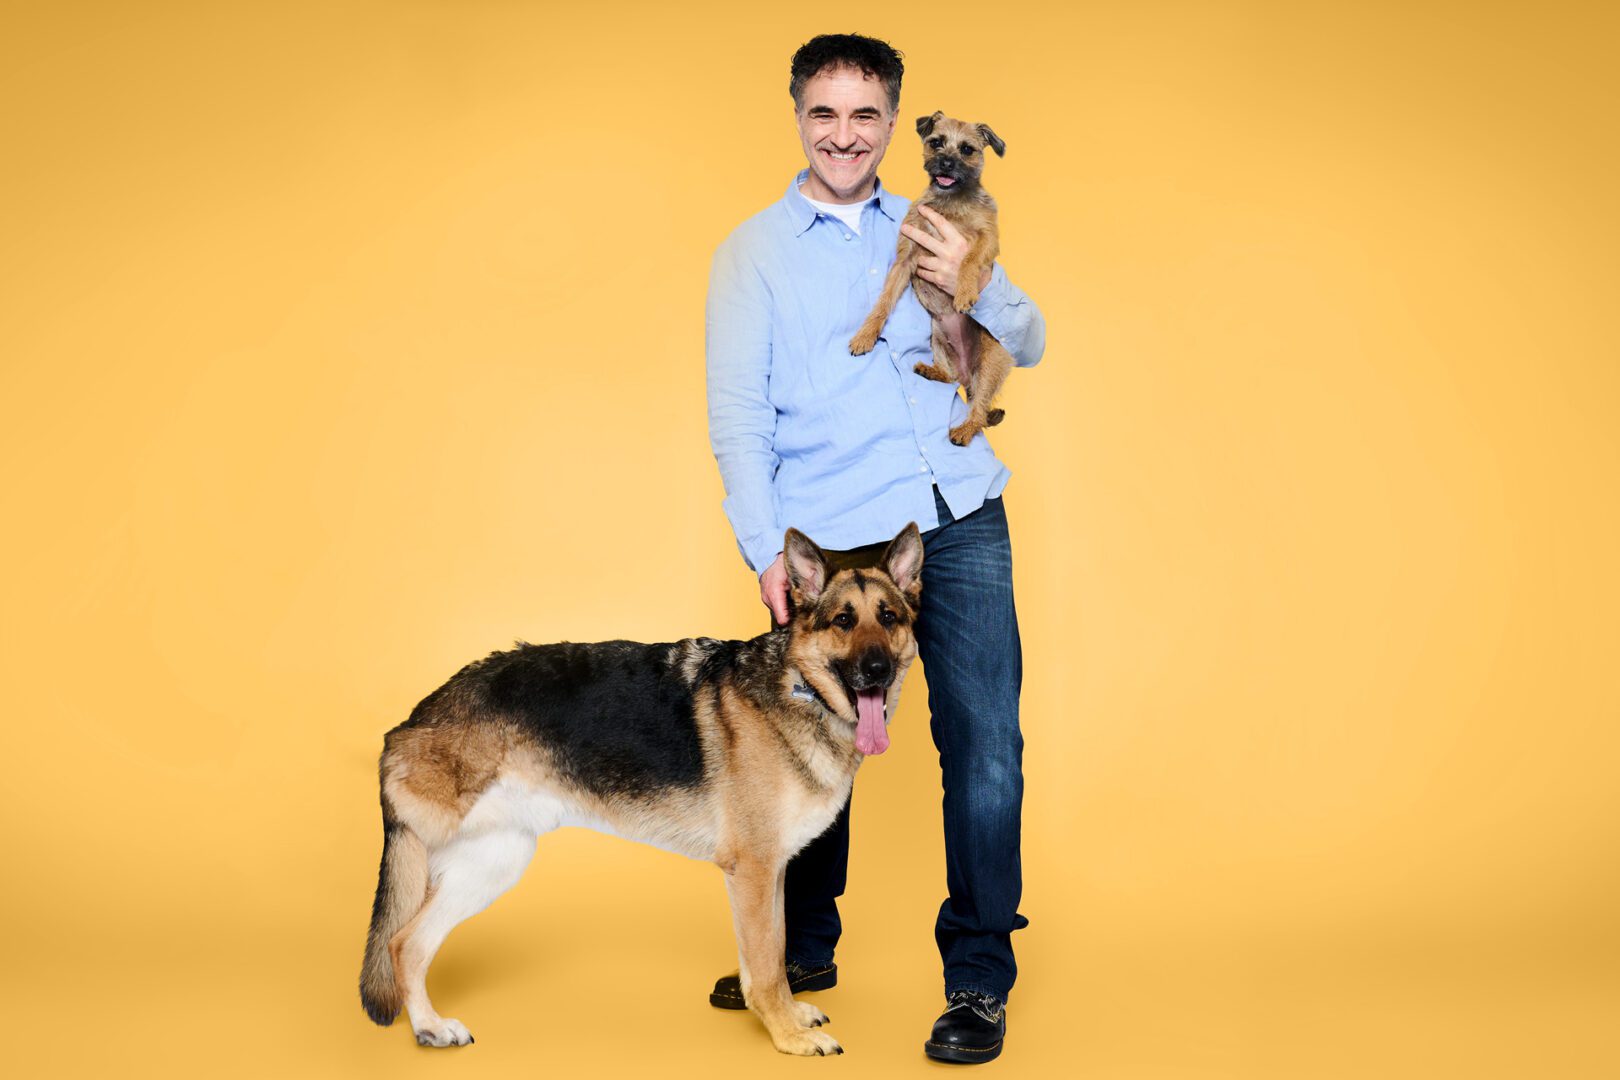 Professor Noel Fitzpatrick standing with a dog and a cat